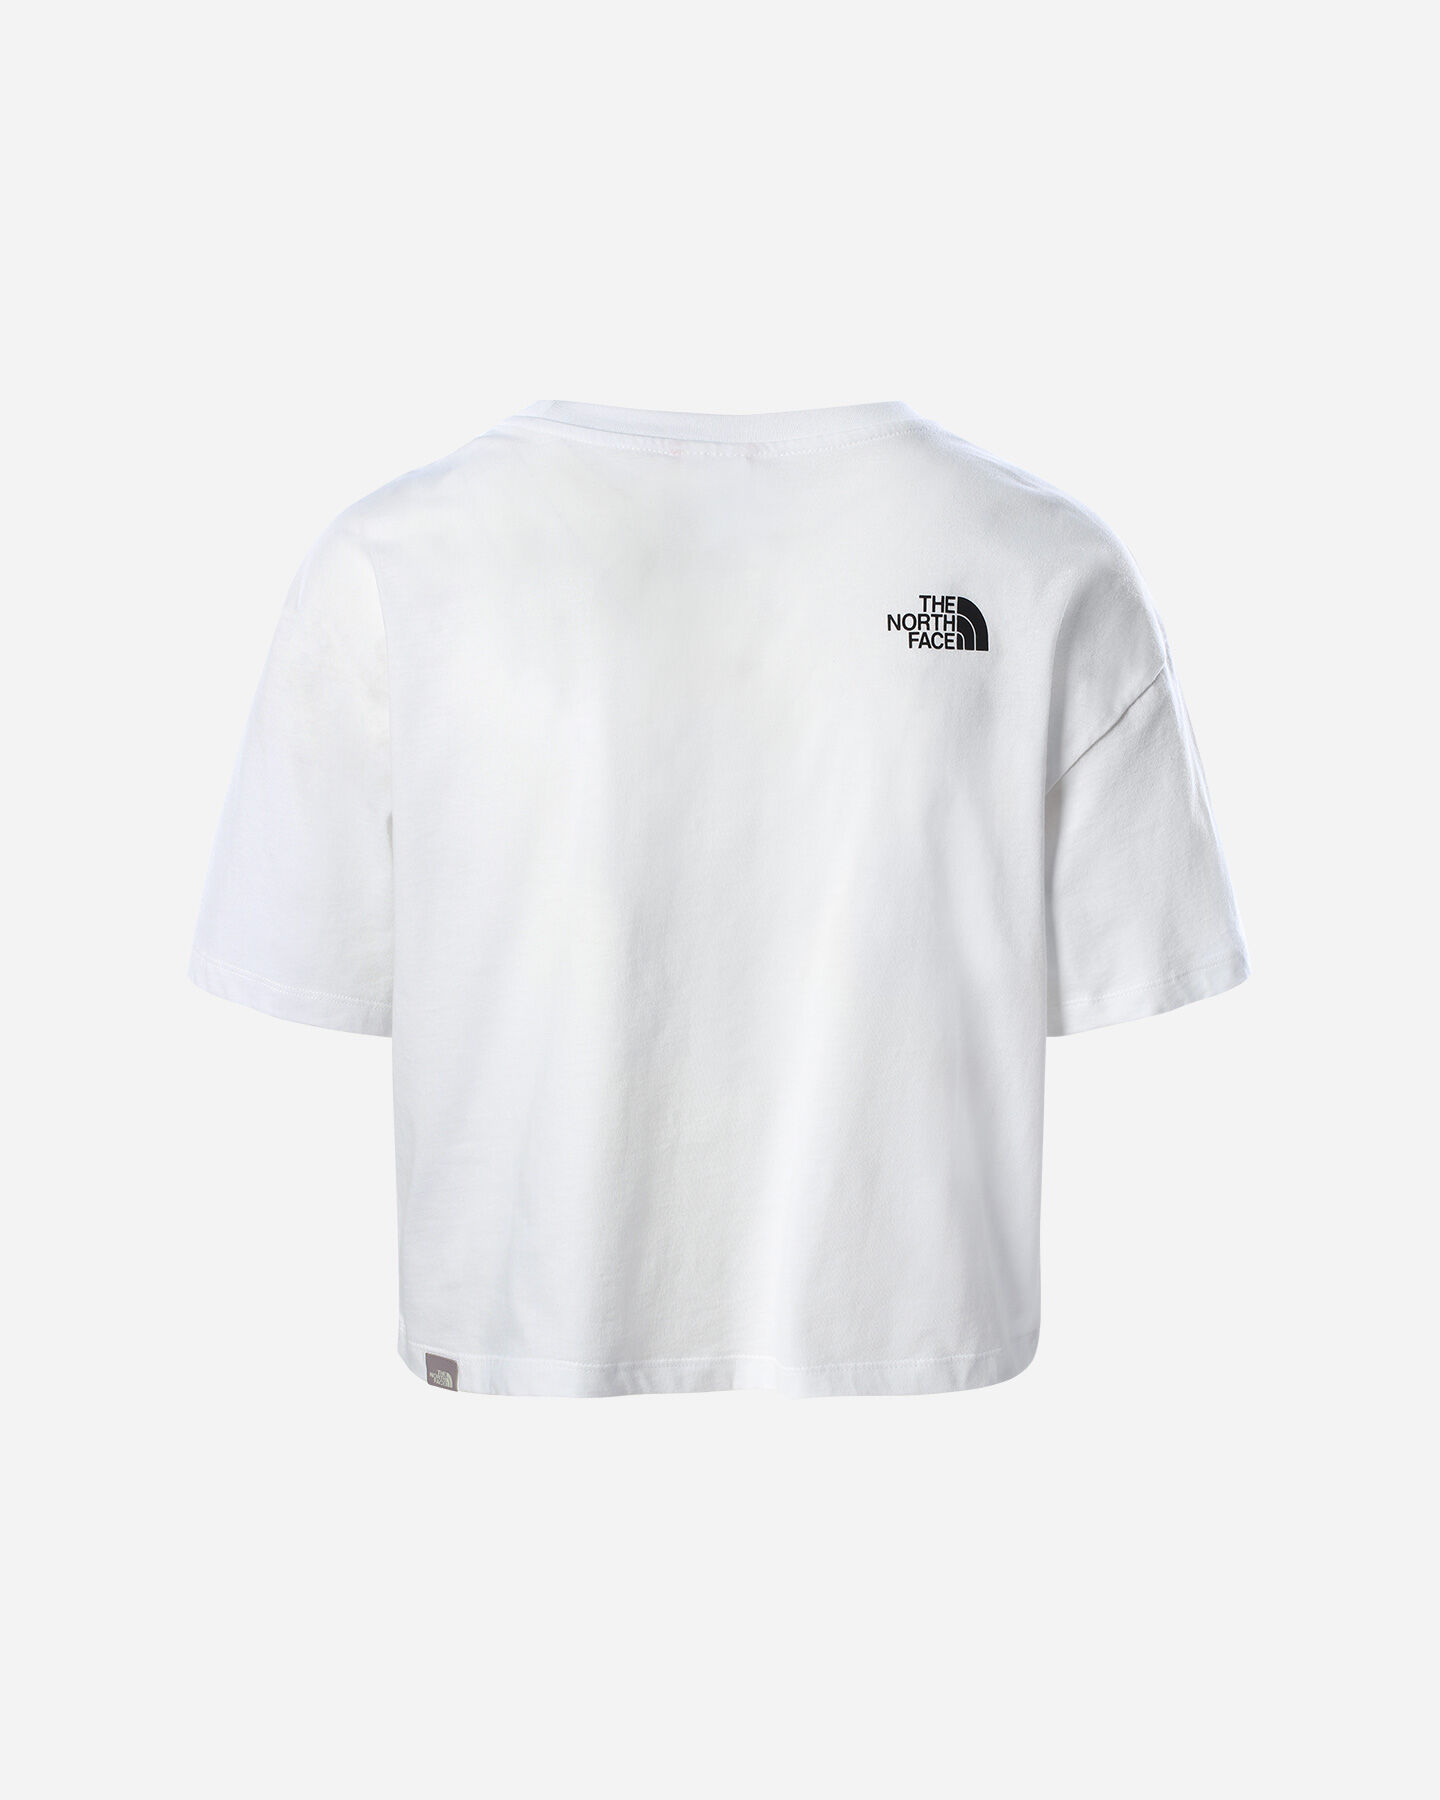  T-Shirt THE NORTH FACE EASY CROPPED W S5292893 scatto 1